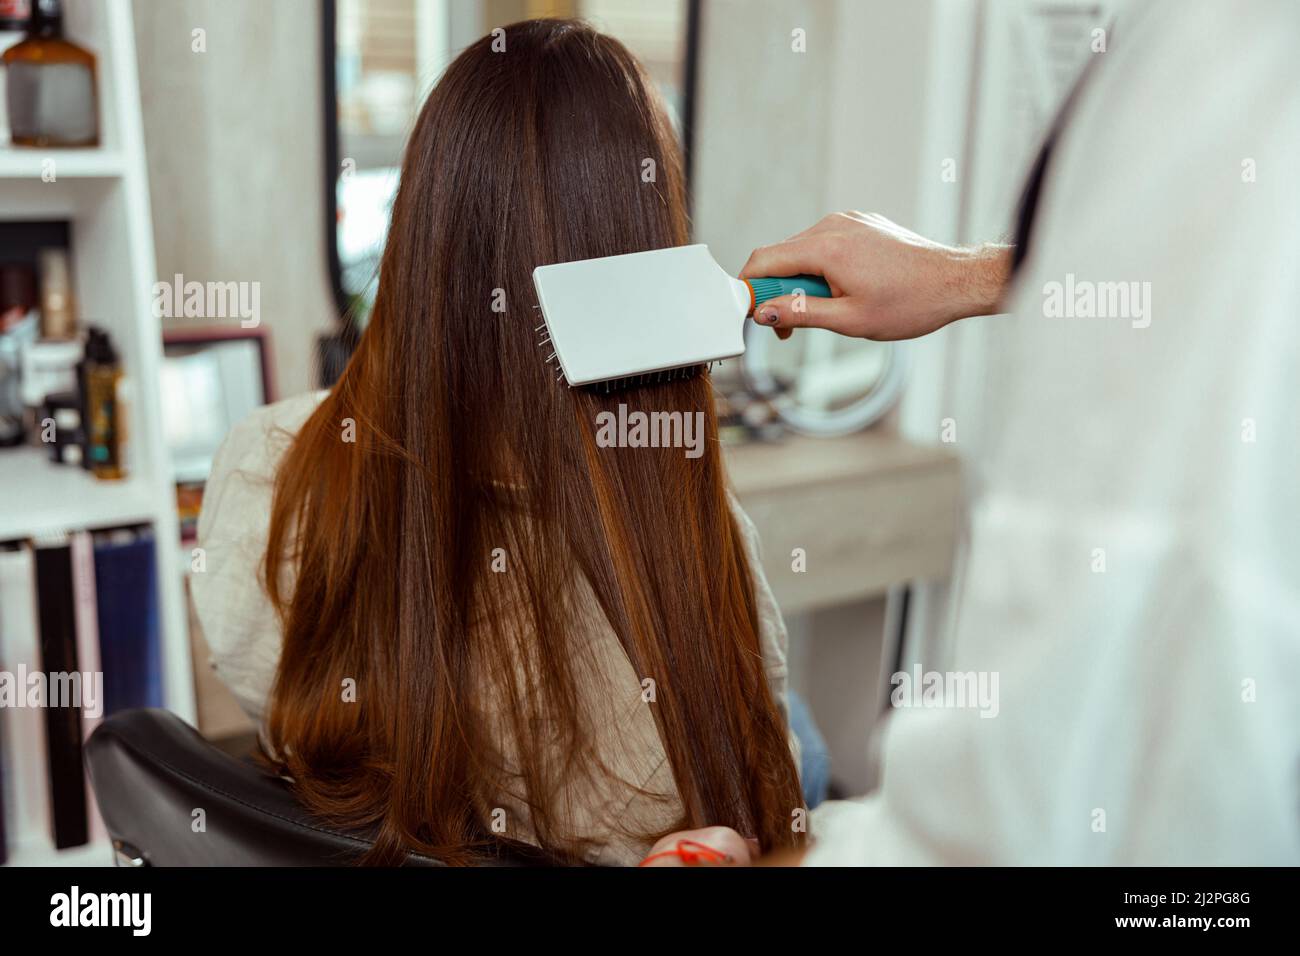 Hand of hairdresser brushing long and shiny brown hair of young woman at beauty salon Stock Photo